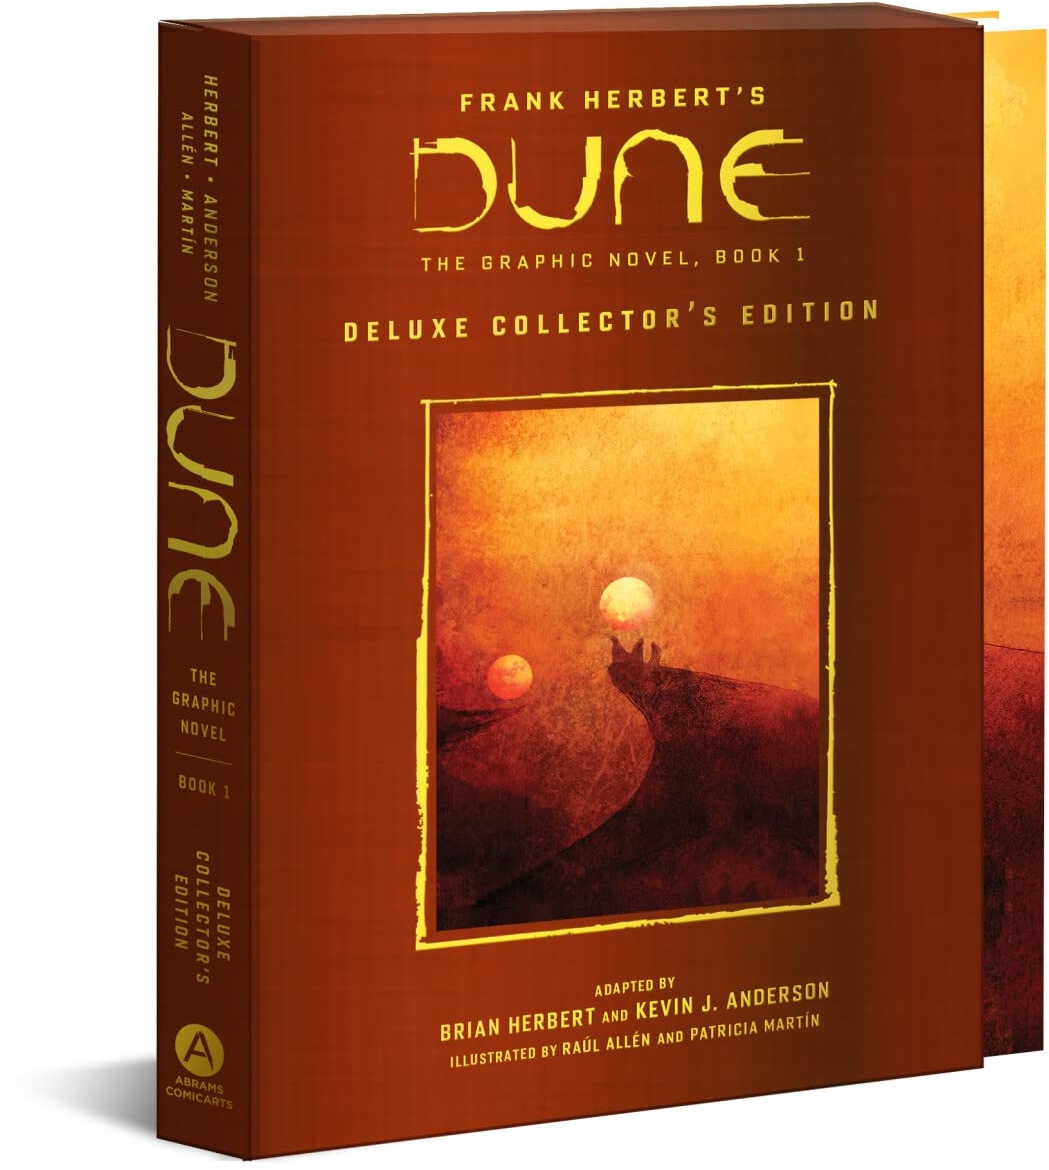 DUNE: The Graphic Novel, Book 1: Dune: Deluxe Collector's Edition (Dune, 1)